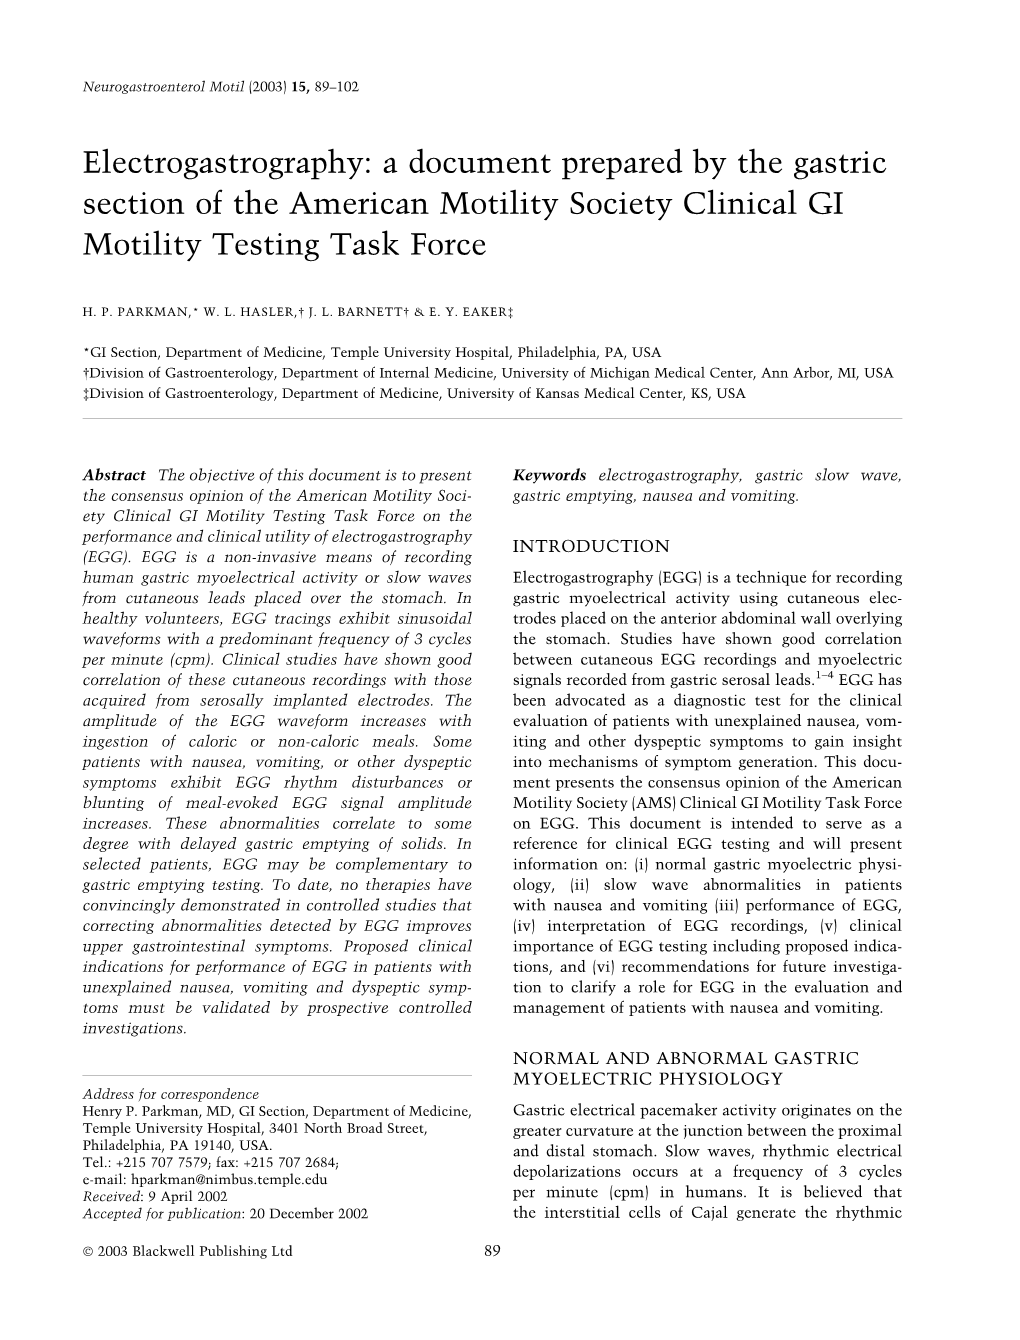 Electrogastrography: a Document Prepared by the Gastric Section of the American Motility Society Clinical GI Motility Testing Task Force